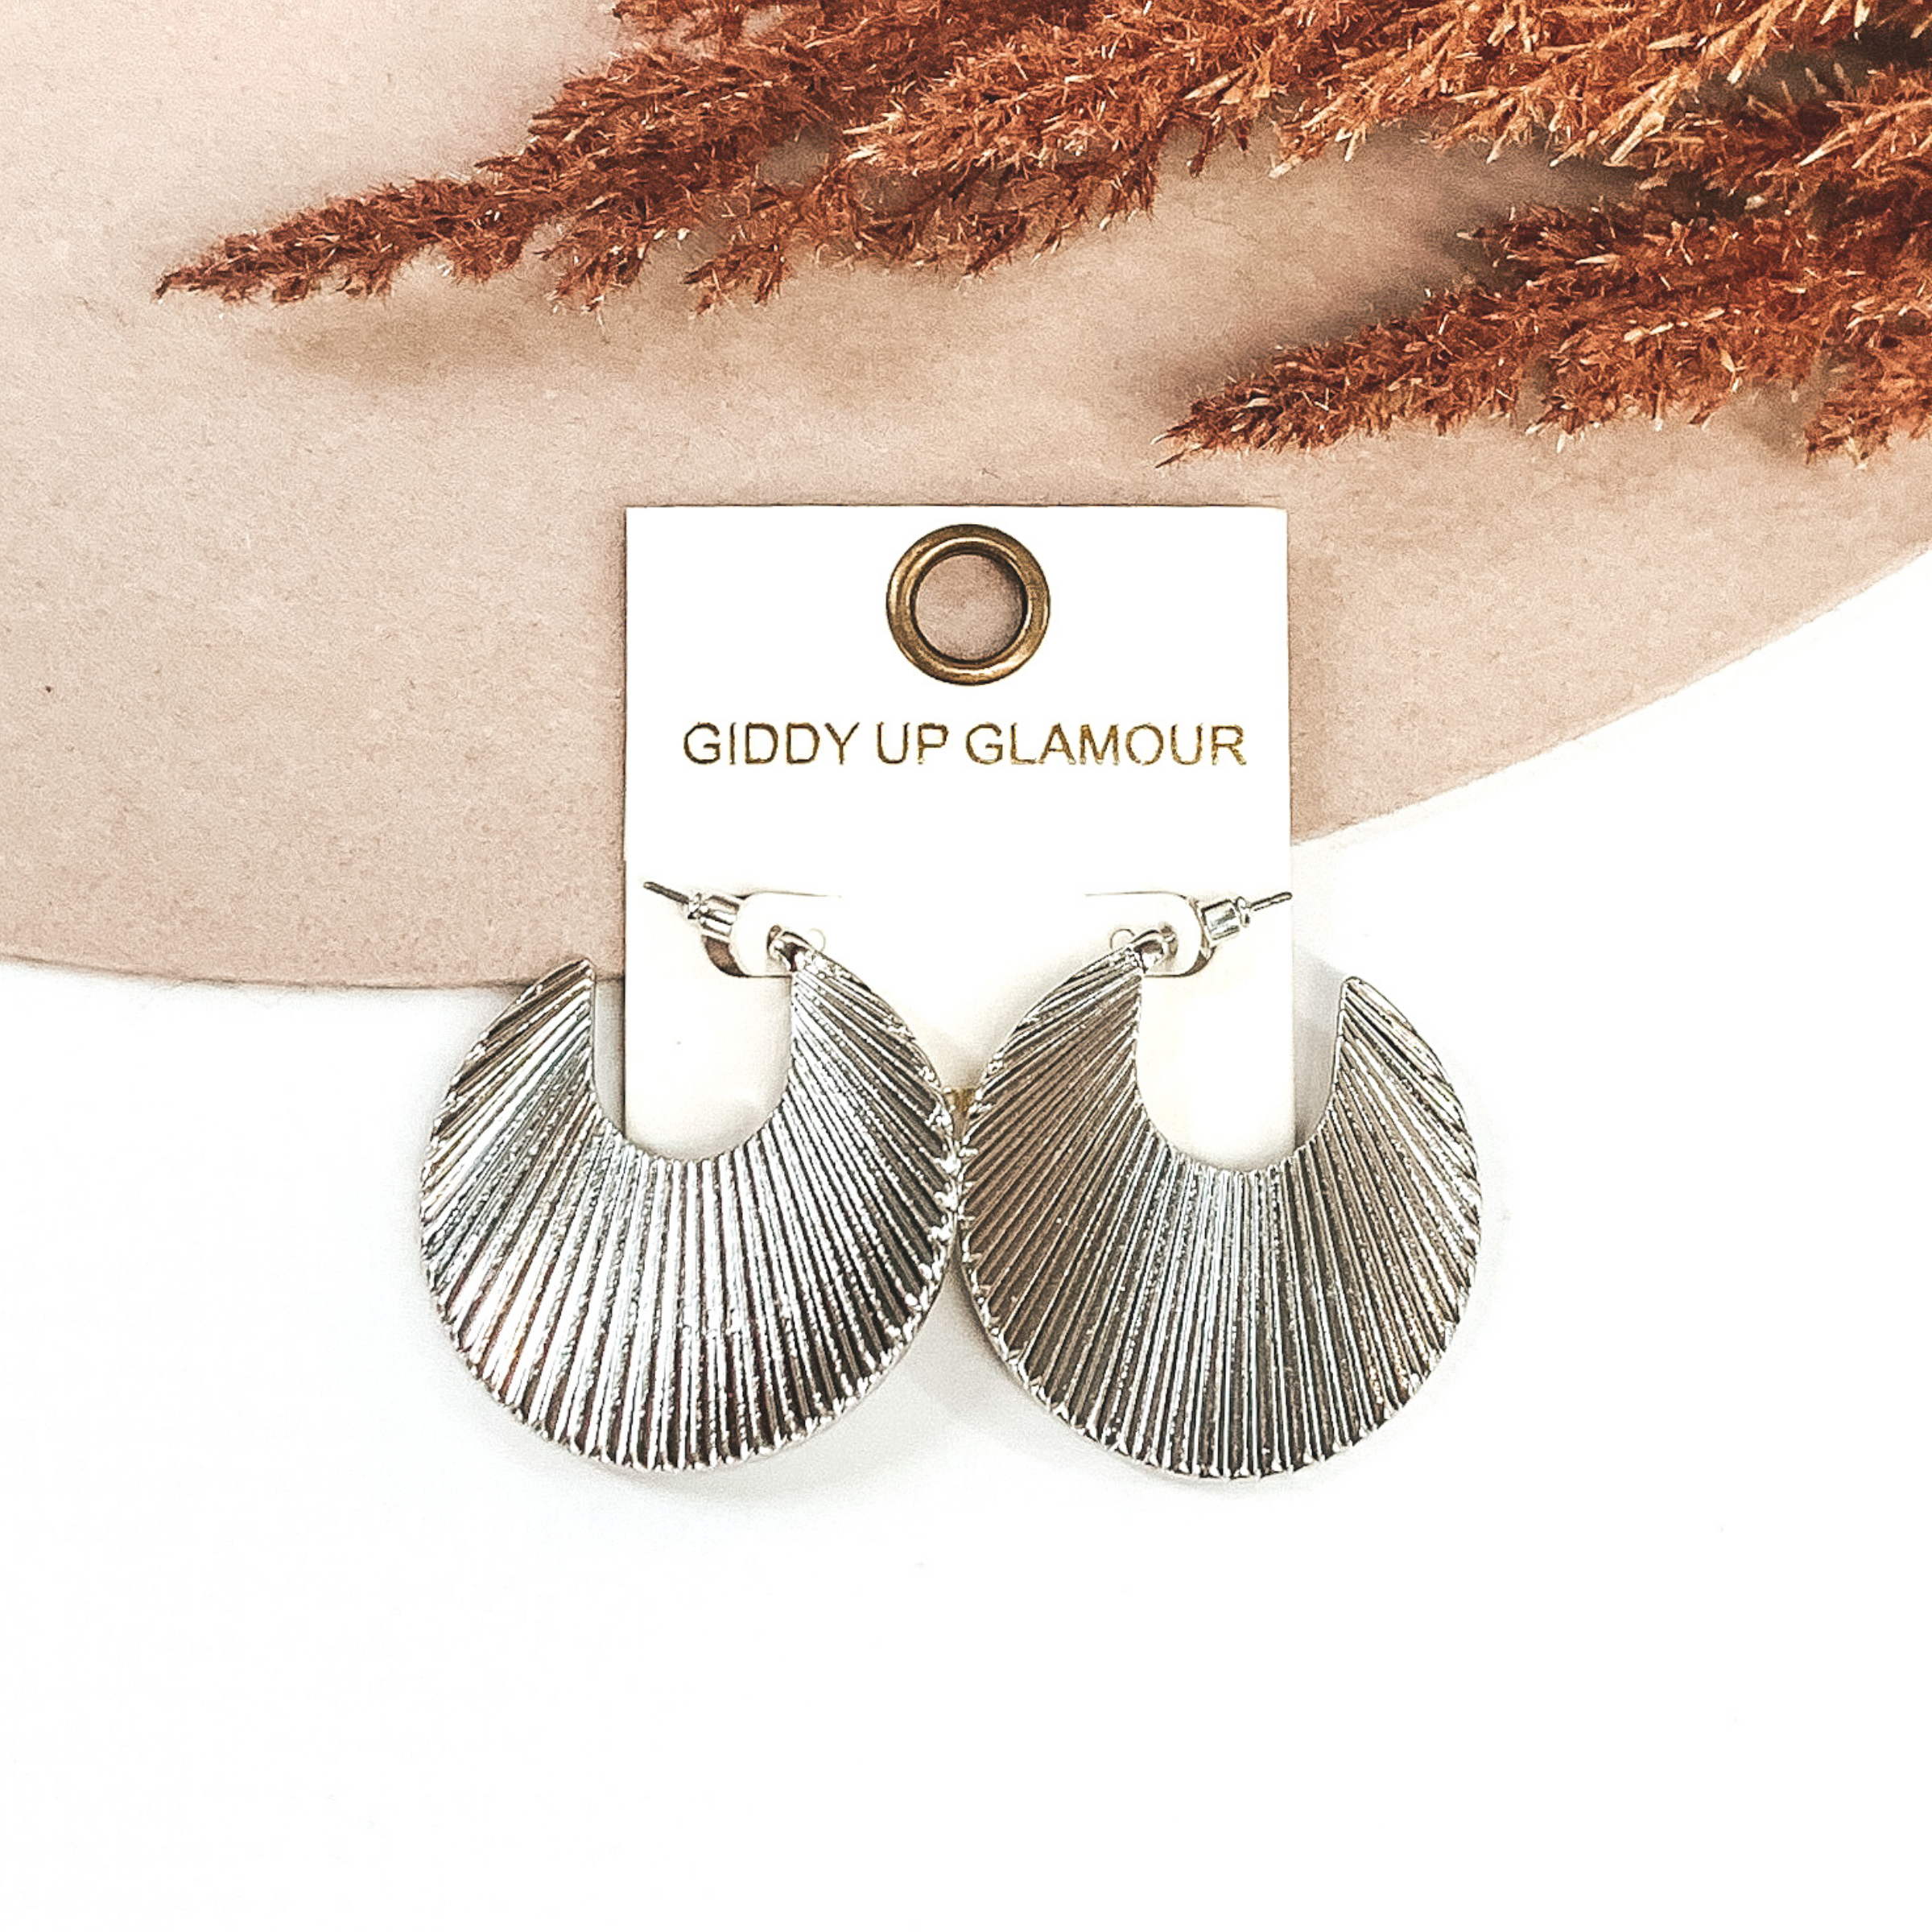 These silver earrings are an irregular curved shaped hoop earrings with notch at the top. These earrings are pictured on a jewelry back that is laying on a white and beige background with brown floral at the top. 